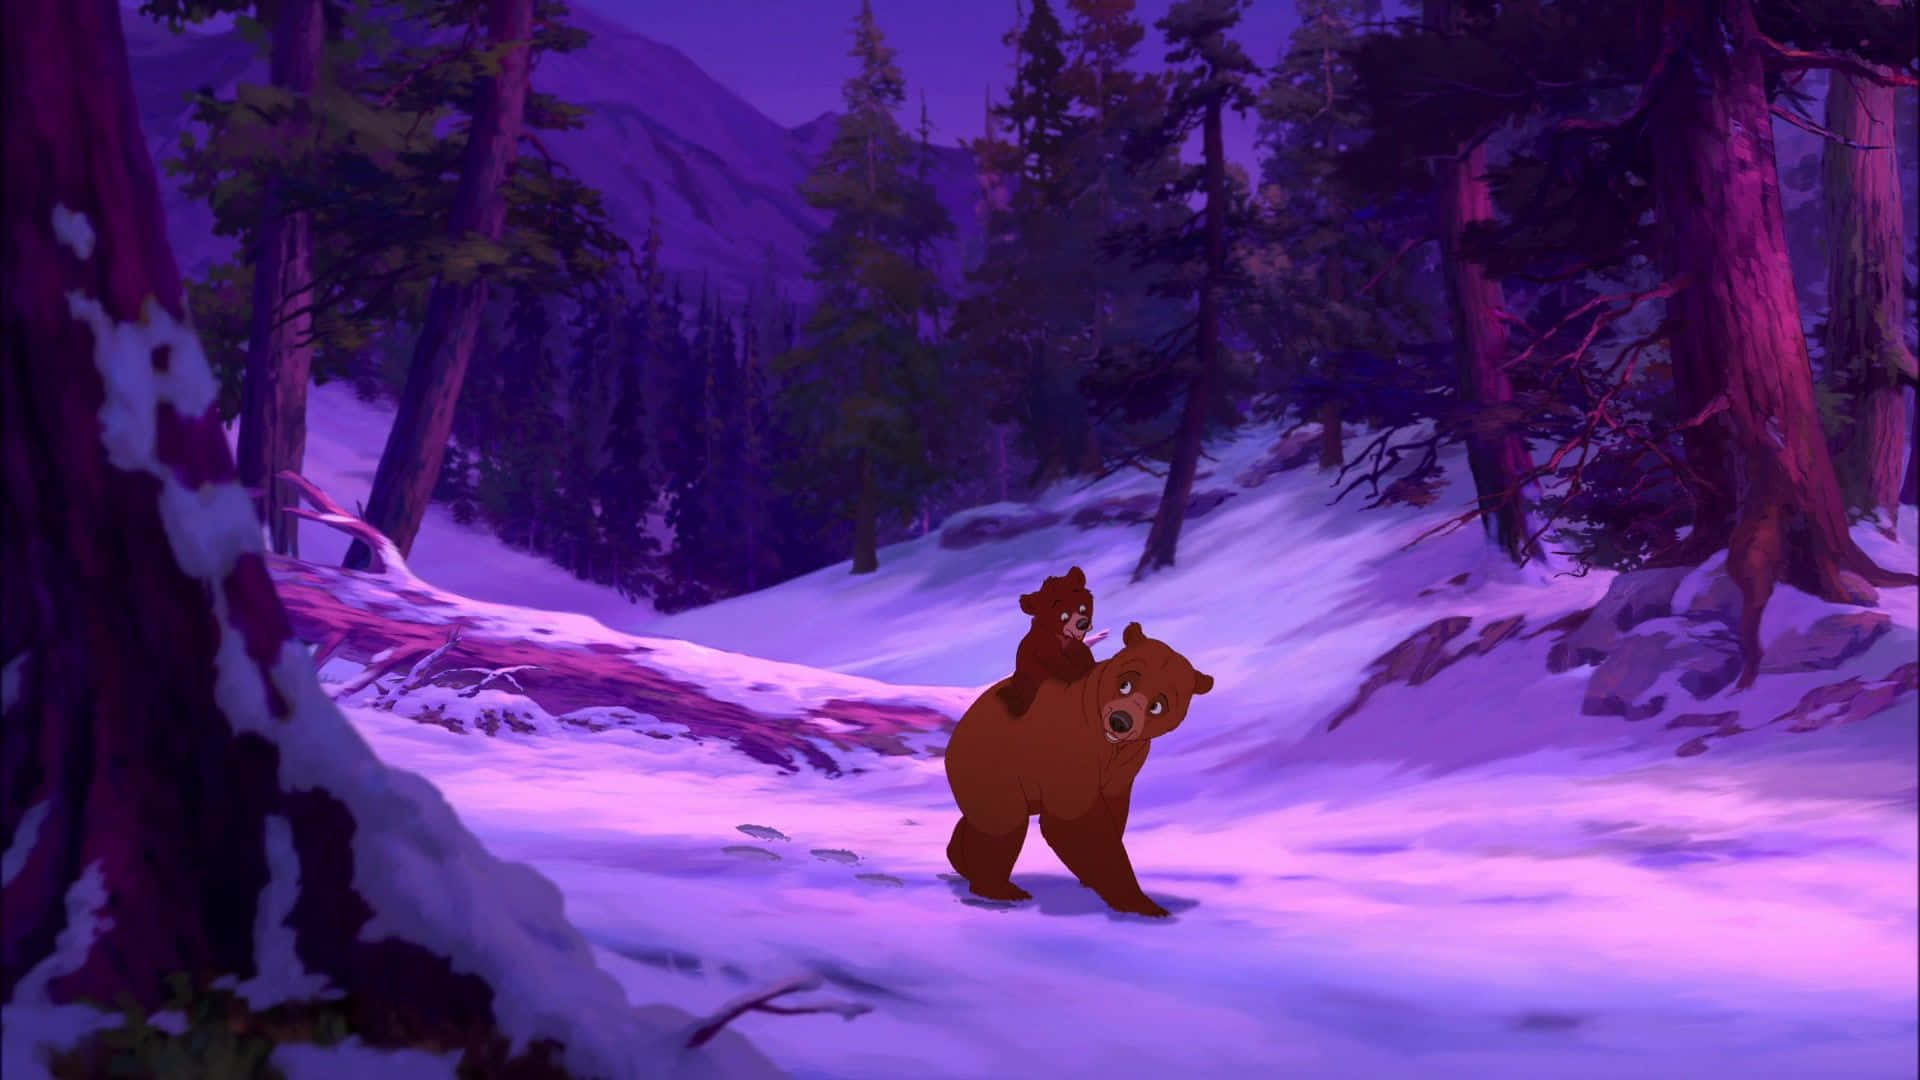 Brother Bear - A reminder of the nostalgic Disney classic